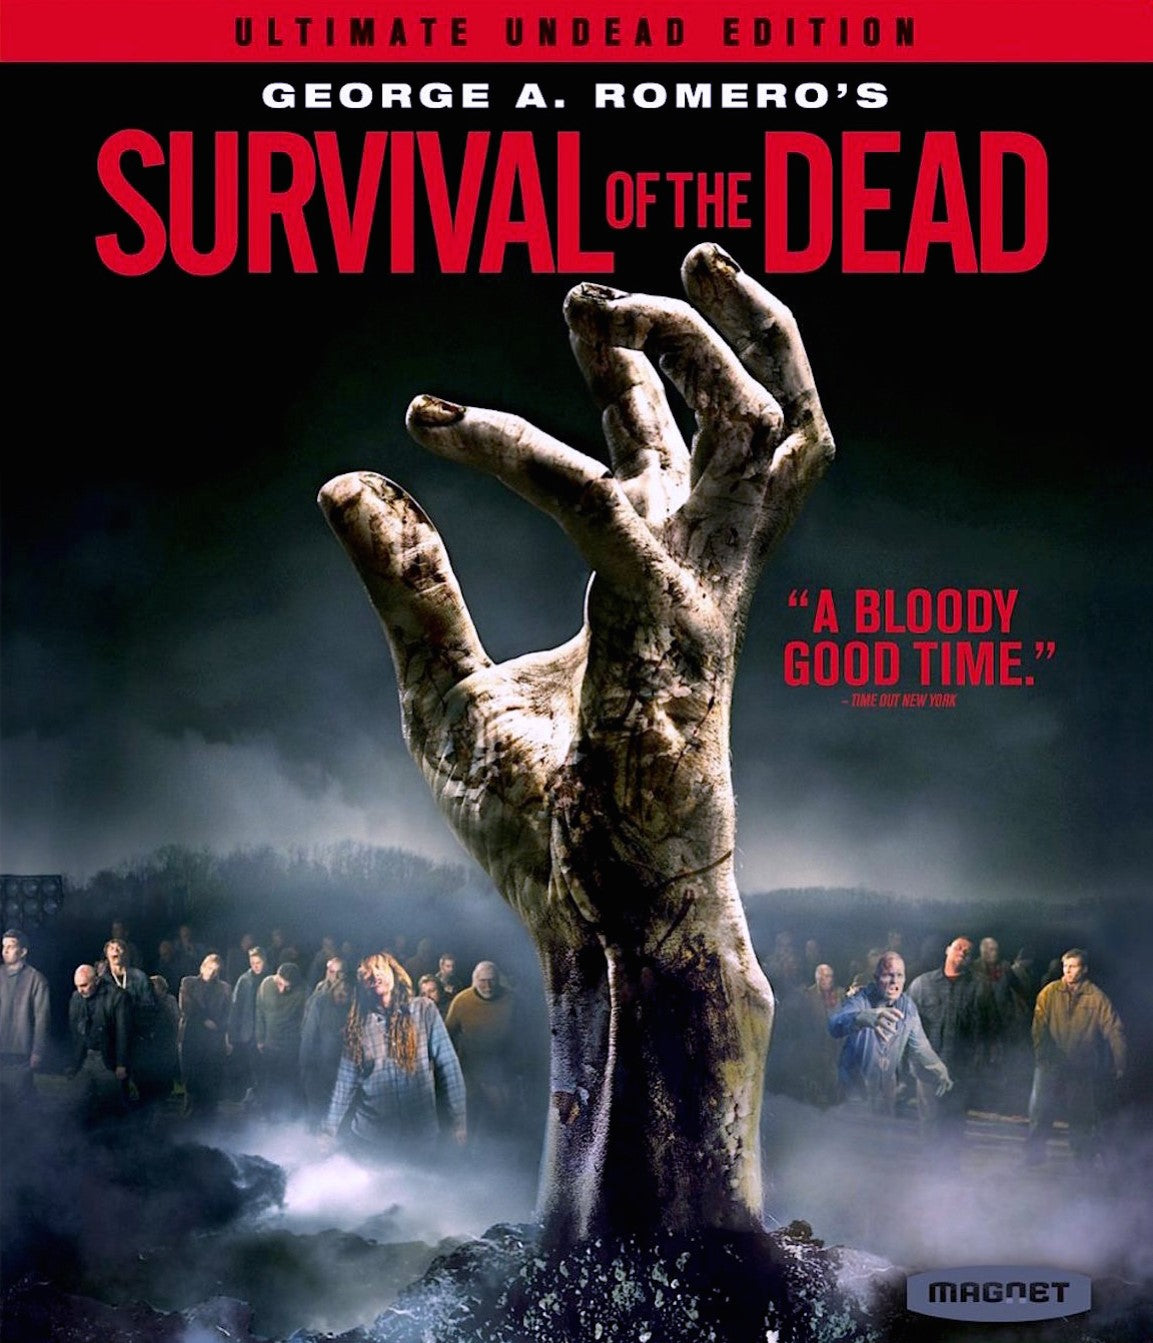 SURVIVAL OF THE DEAD BLU-RAY